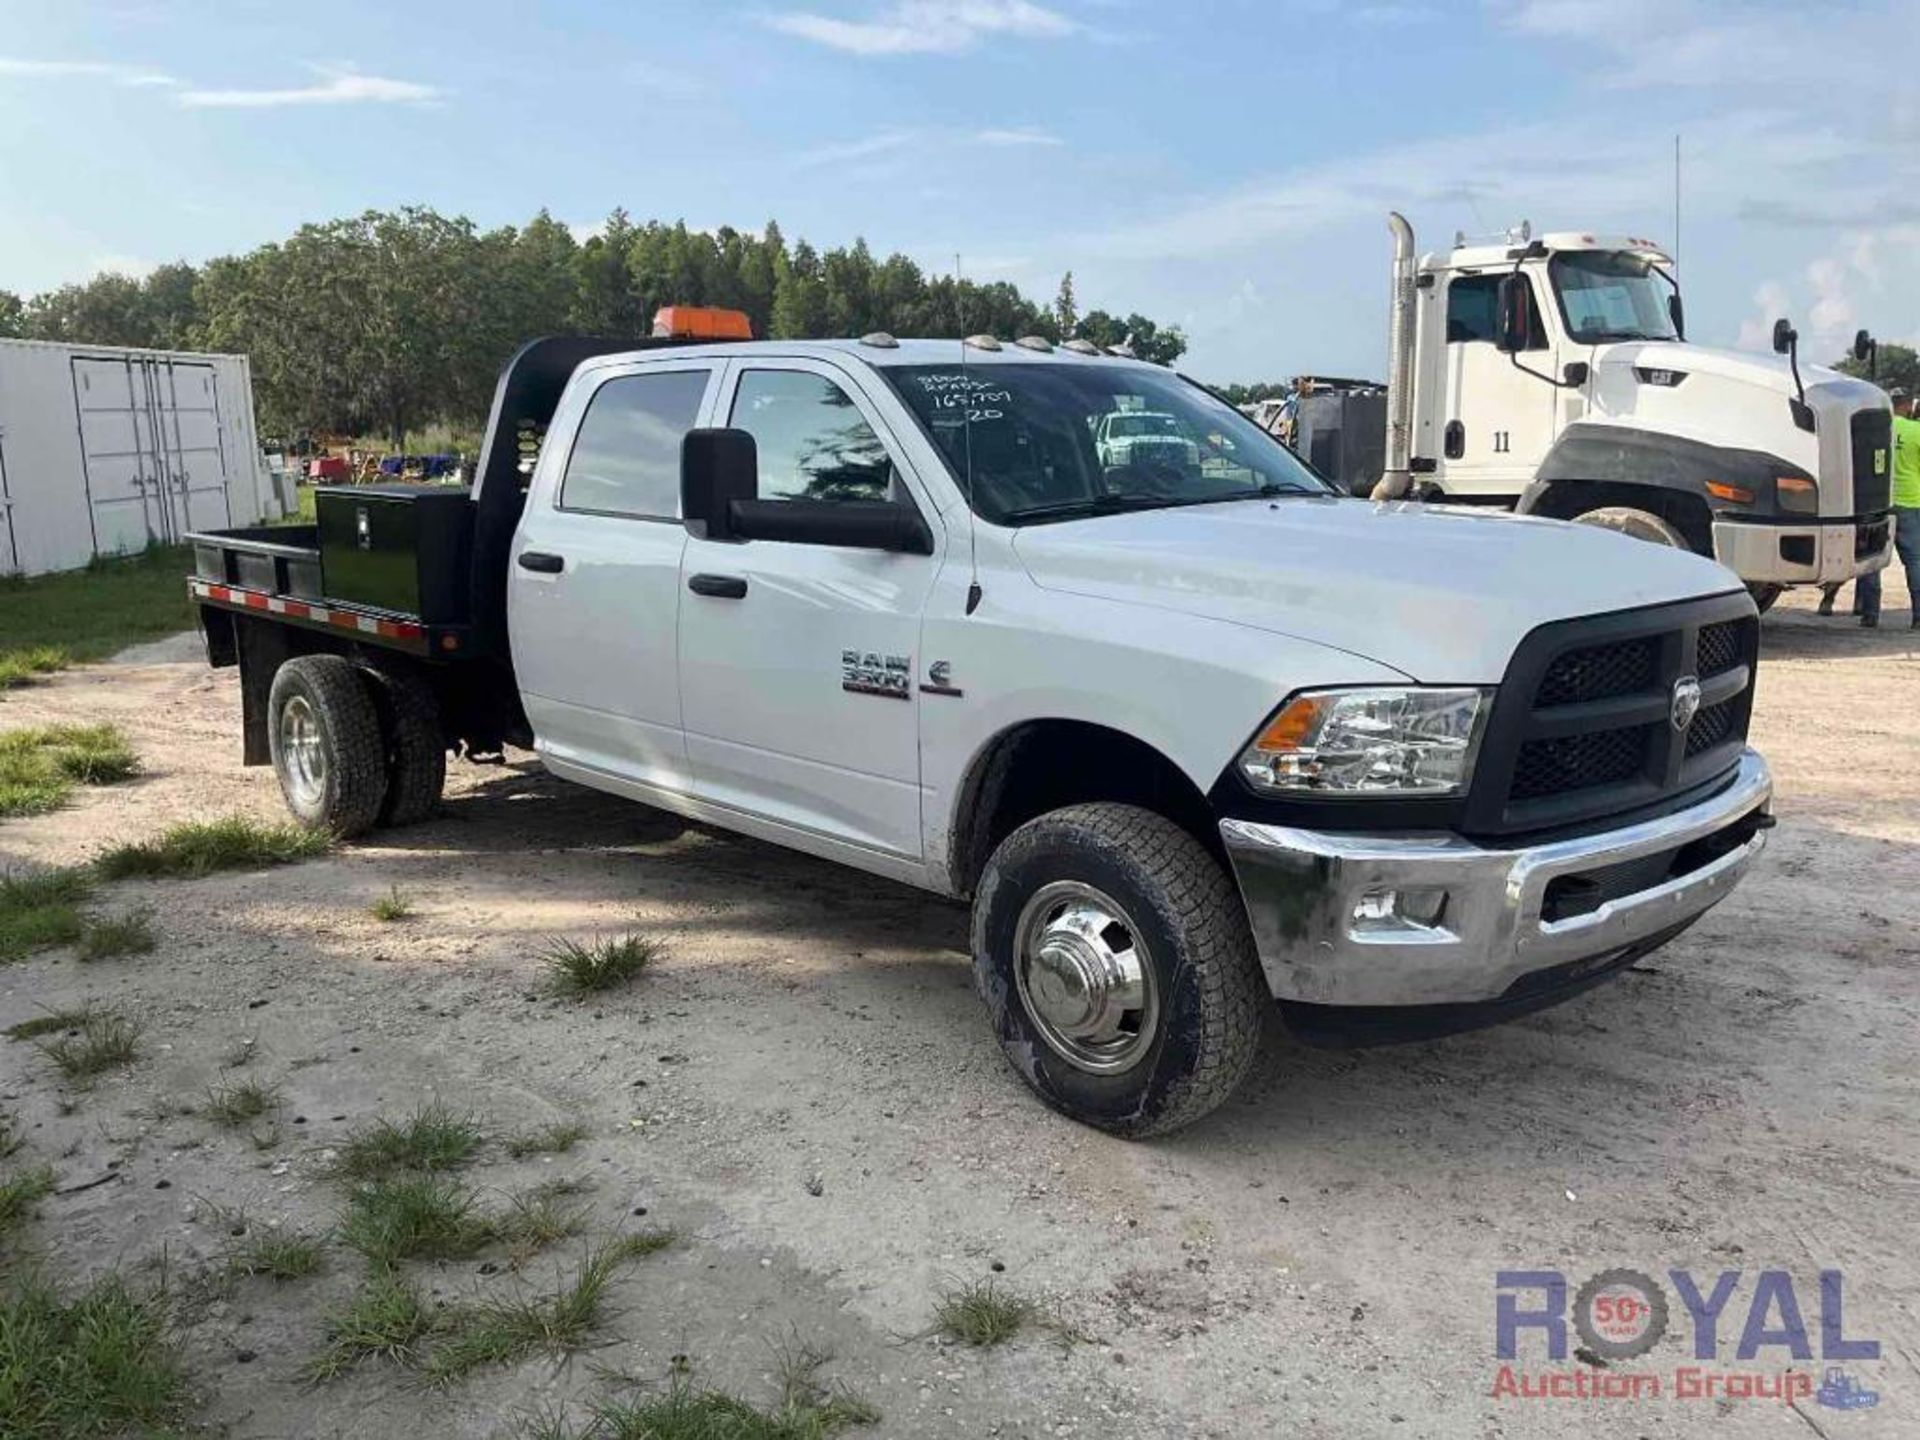 2017 Ram 3500 Flatbed Truck - Image 2 of 22